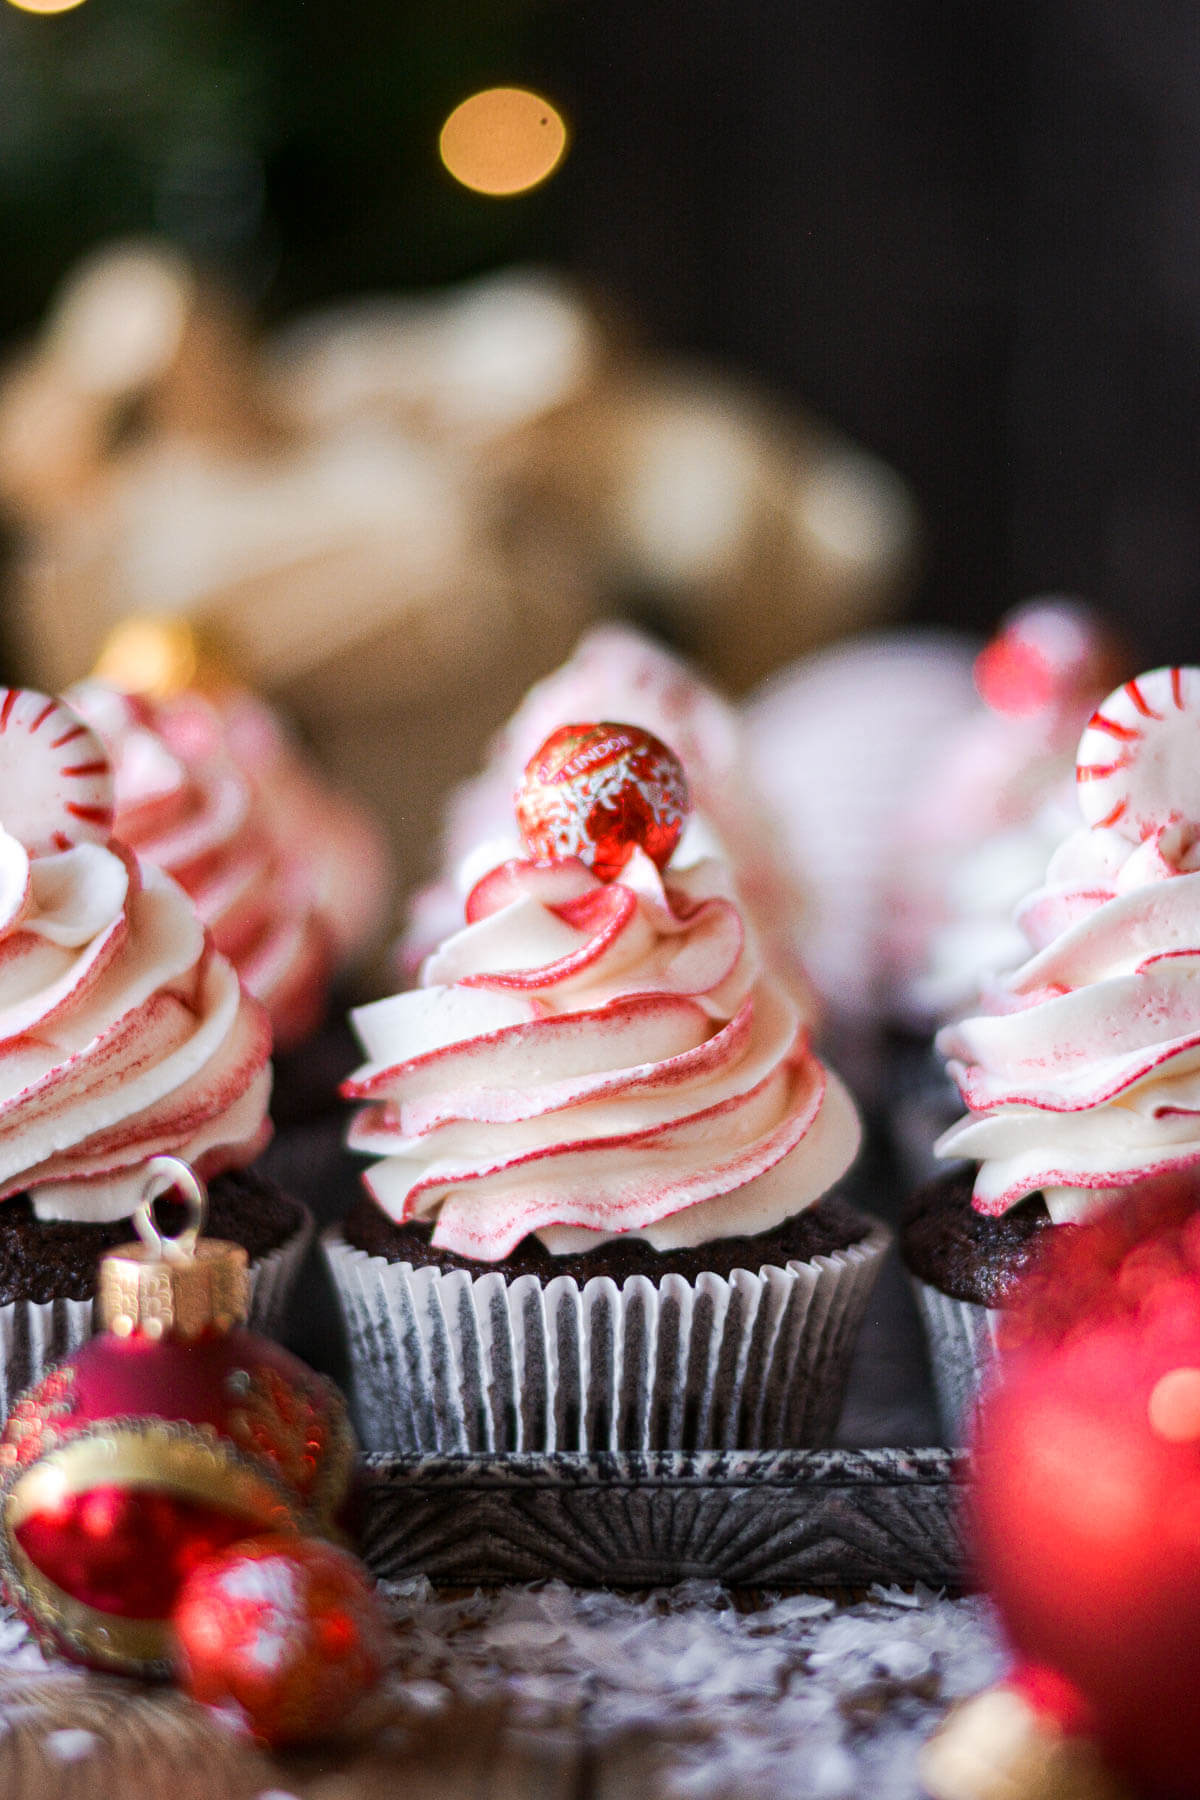 Chocolate peppermint swirl cupcakes topped with peppermints and chocolate balls.